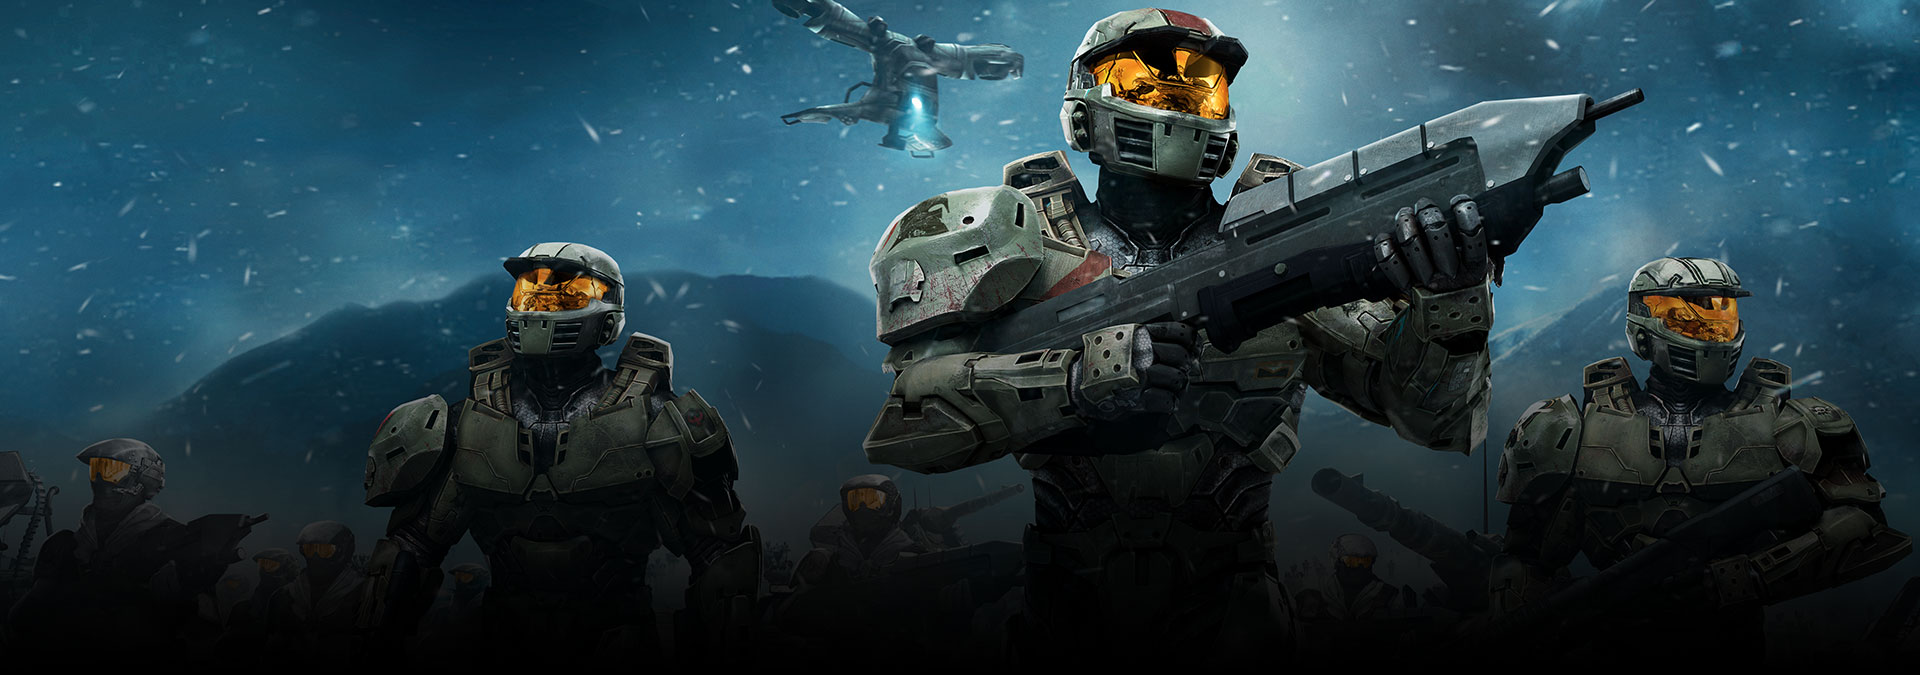 Halo Wars: Definitive Edition | Games | Halo - Official Site